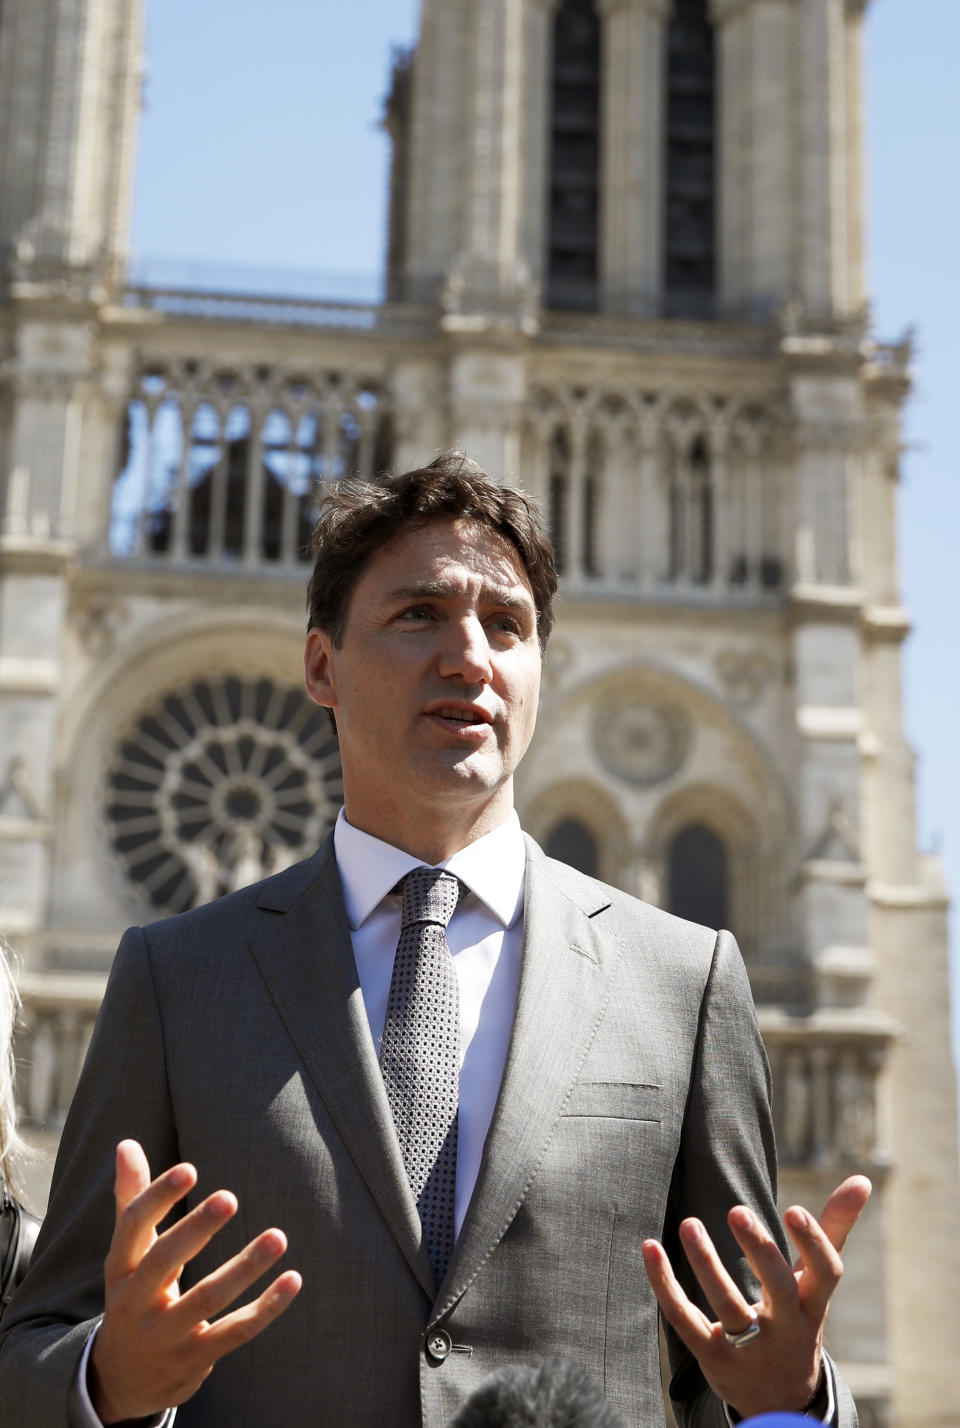 Canadian Prime Minister Justin Trudeau adresses reporters after visiting Notre Dame cathedral in Paris, Wednesday, May 15, 2019. Trudeau is in Paris for a meeting with World leaders and tech bosses to make a joint push to eliminate acts of violent extremism from being shown online. (AP Photo/Christophe Ena)